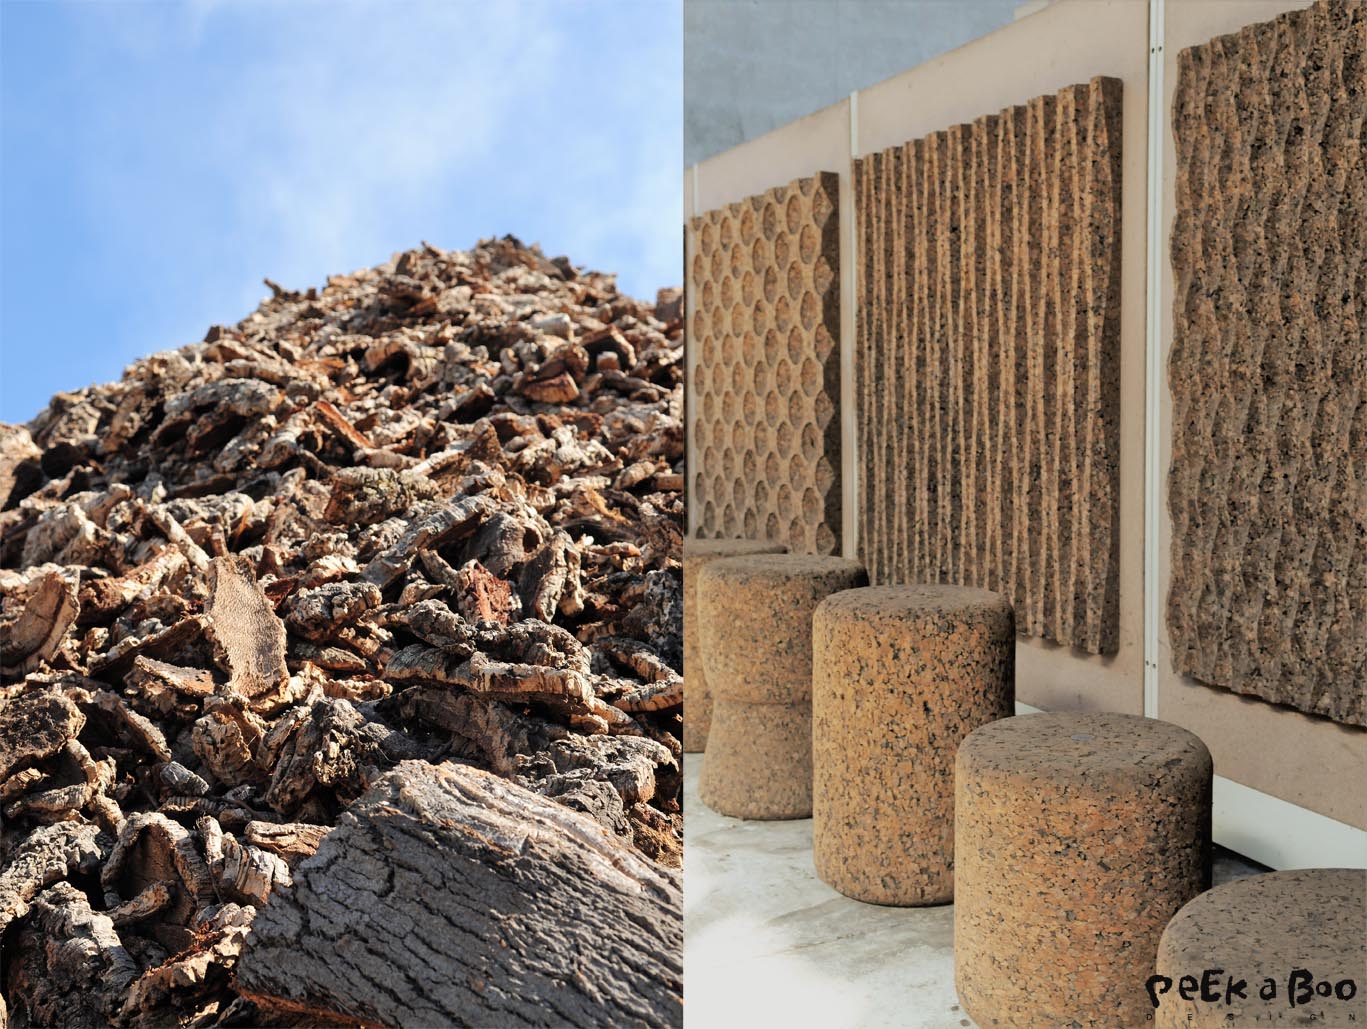 The raw cork before it has been through production and ends up as cool interior styles.